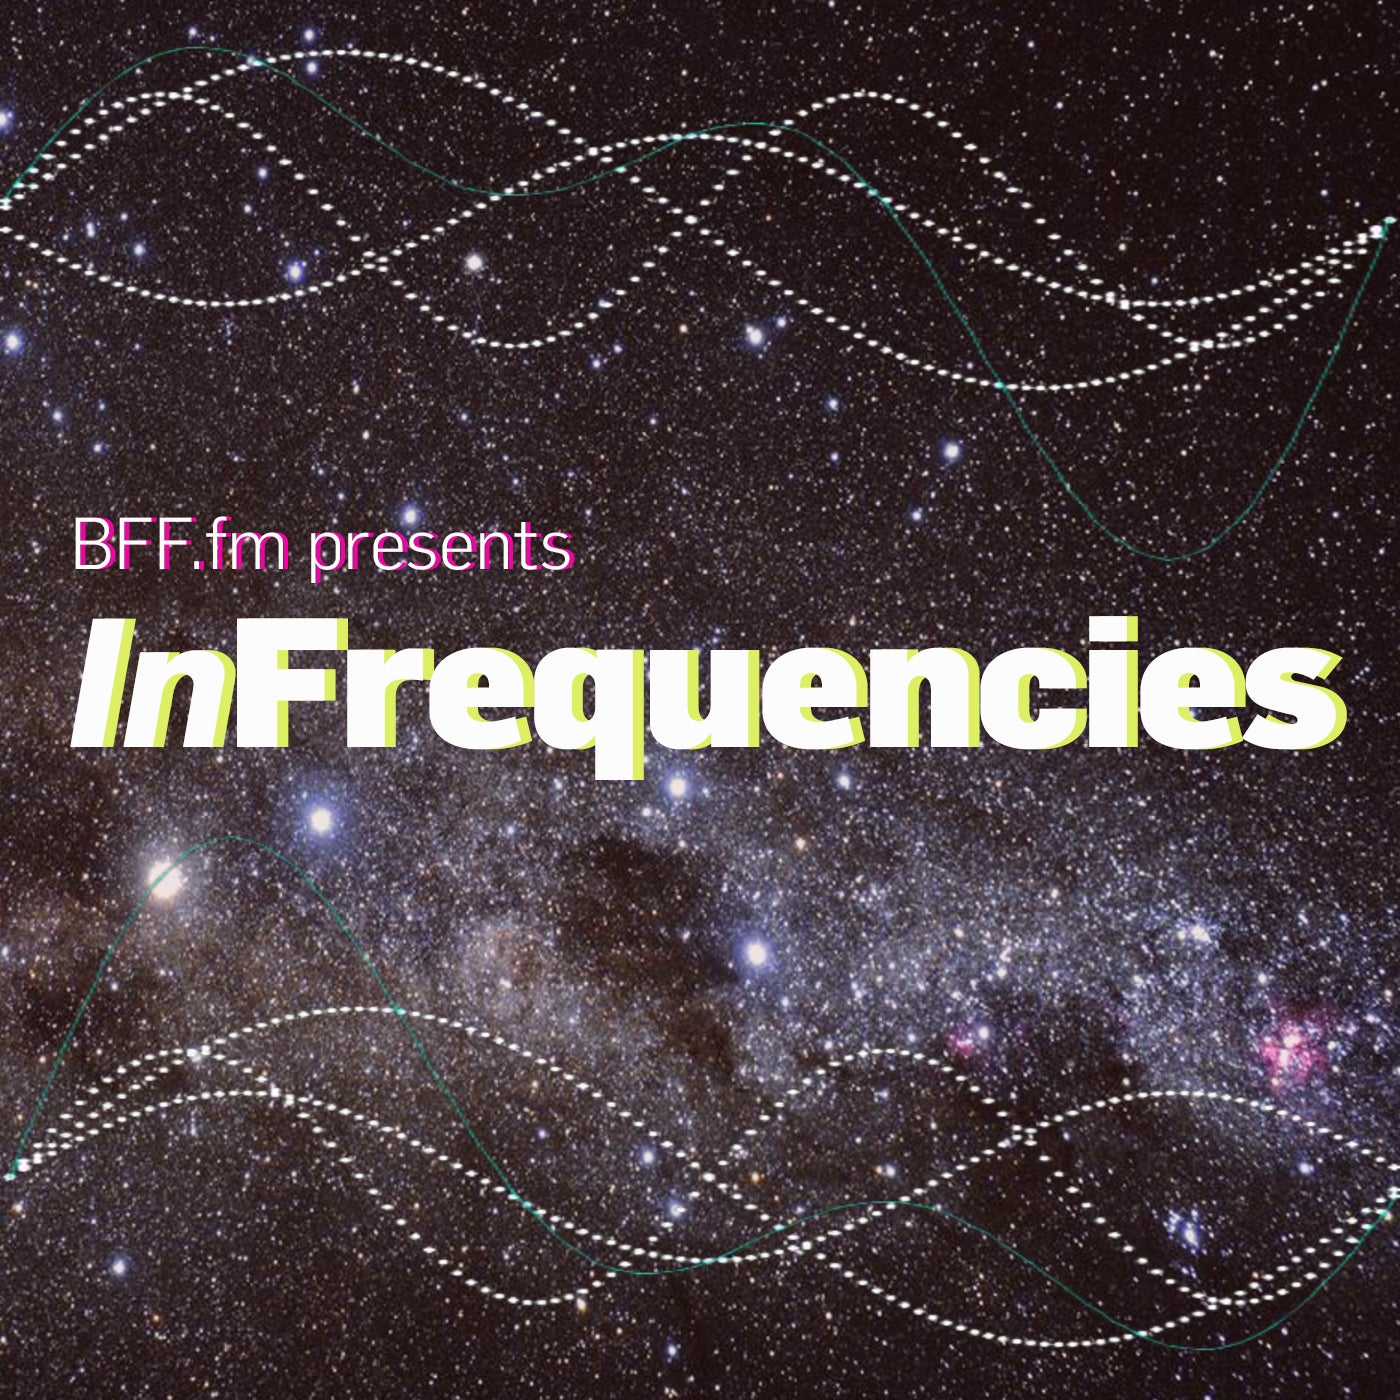 InFrequencies from BFF.fm